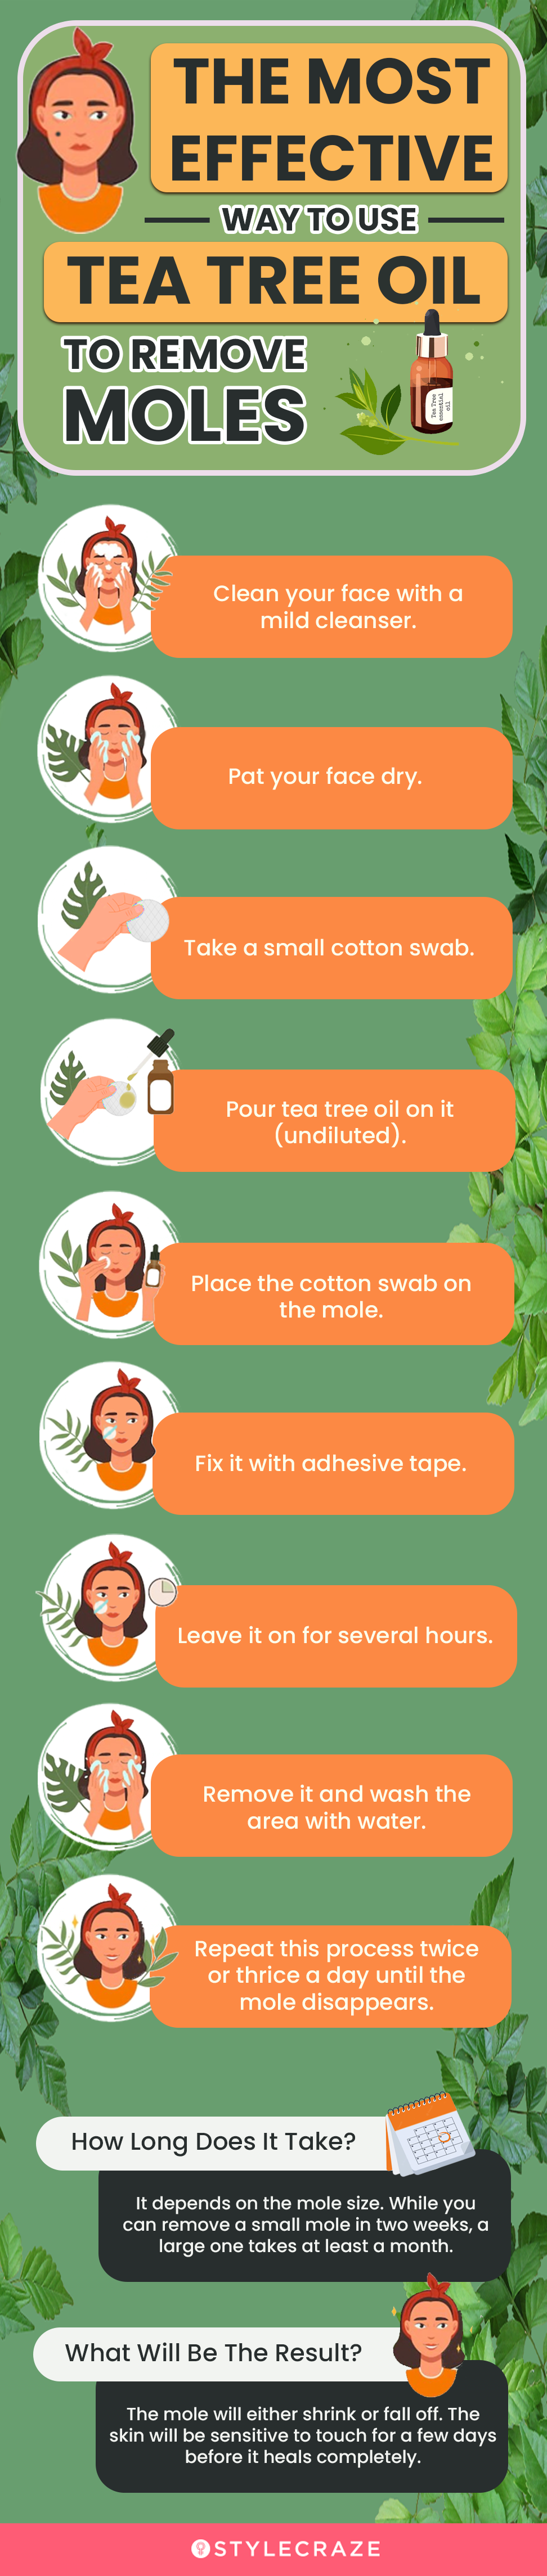 the most effective ways to use tea tree oil to remove moles (infographic)